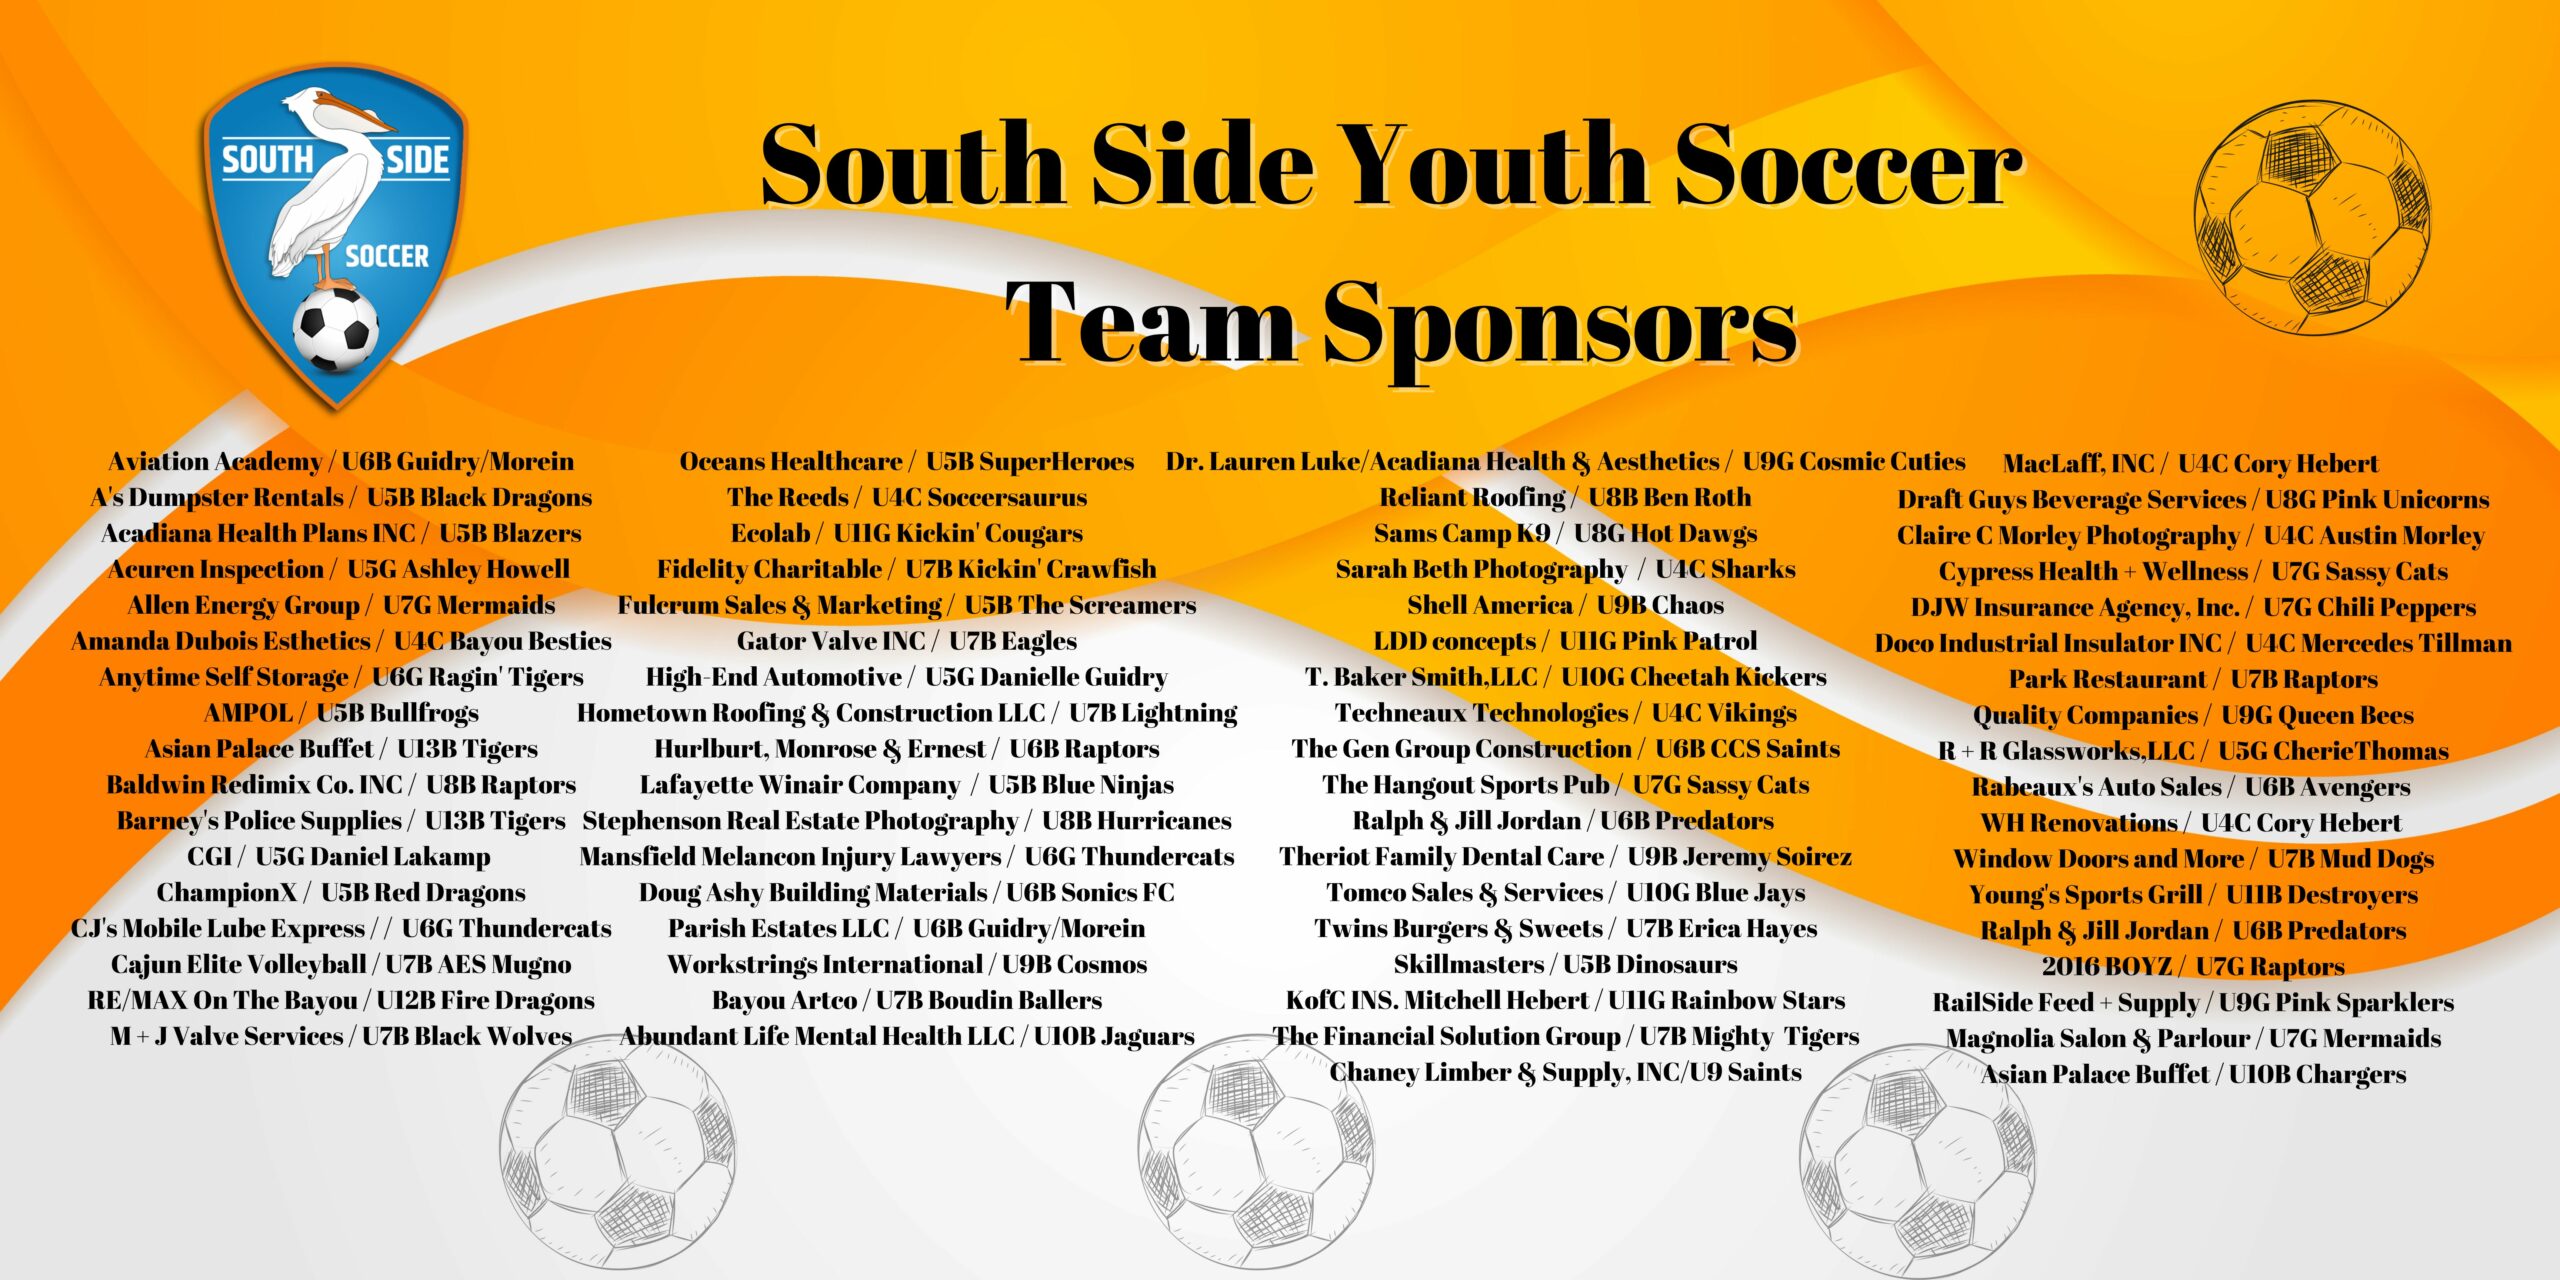 These sponsorships go towards covering the cost of Medals, Trophies, Field Maintenance, and Coach's Gear.